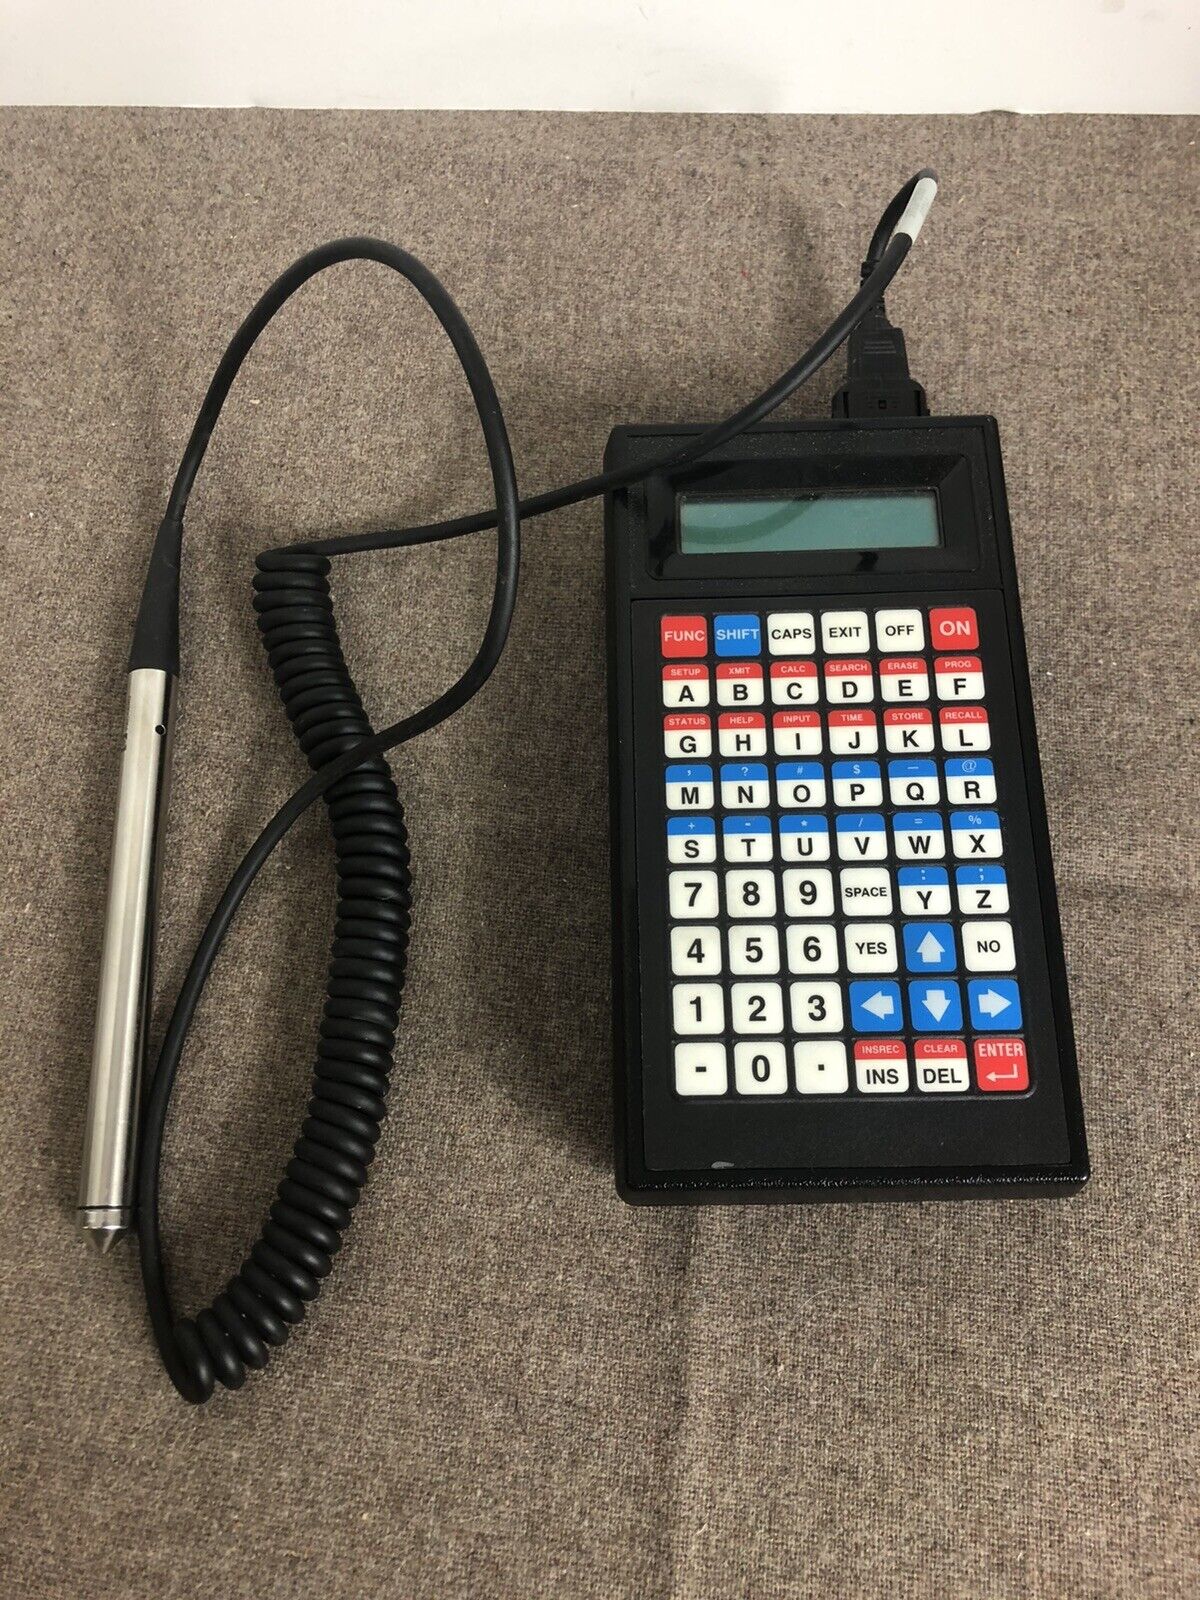 M3000 AMERICAN MICROSYSTEMS Portable Bar Code Reader With Scanner Wand Untested